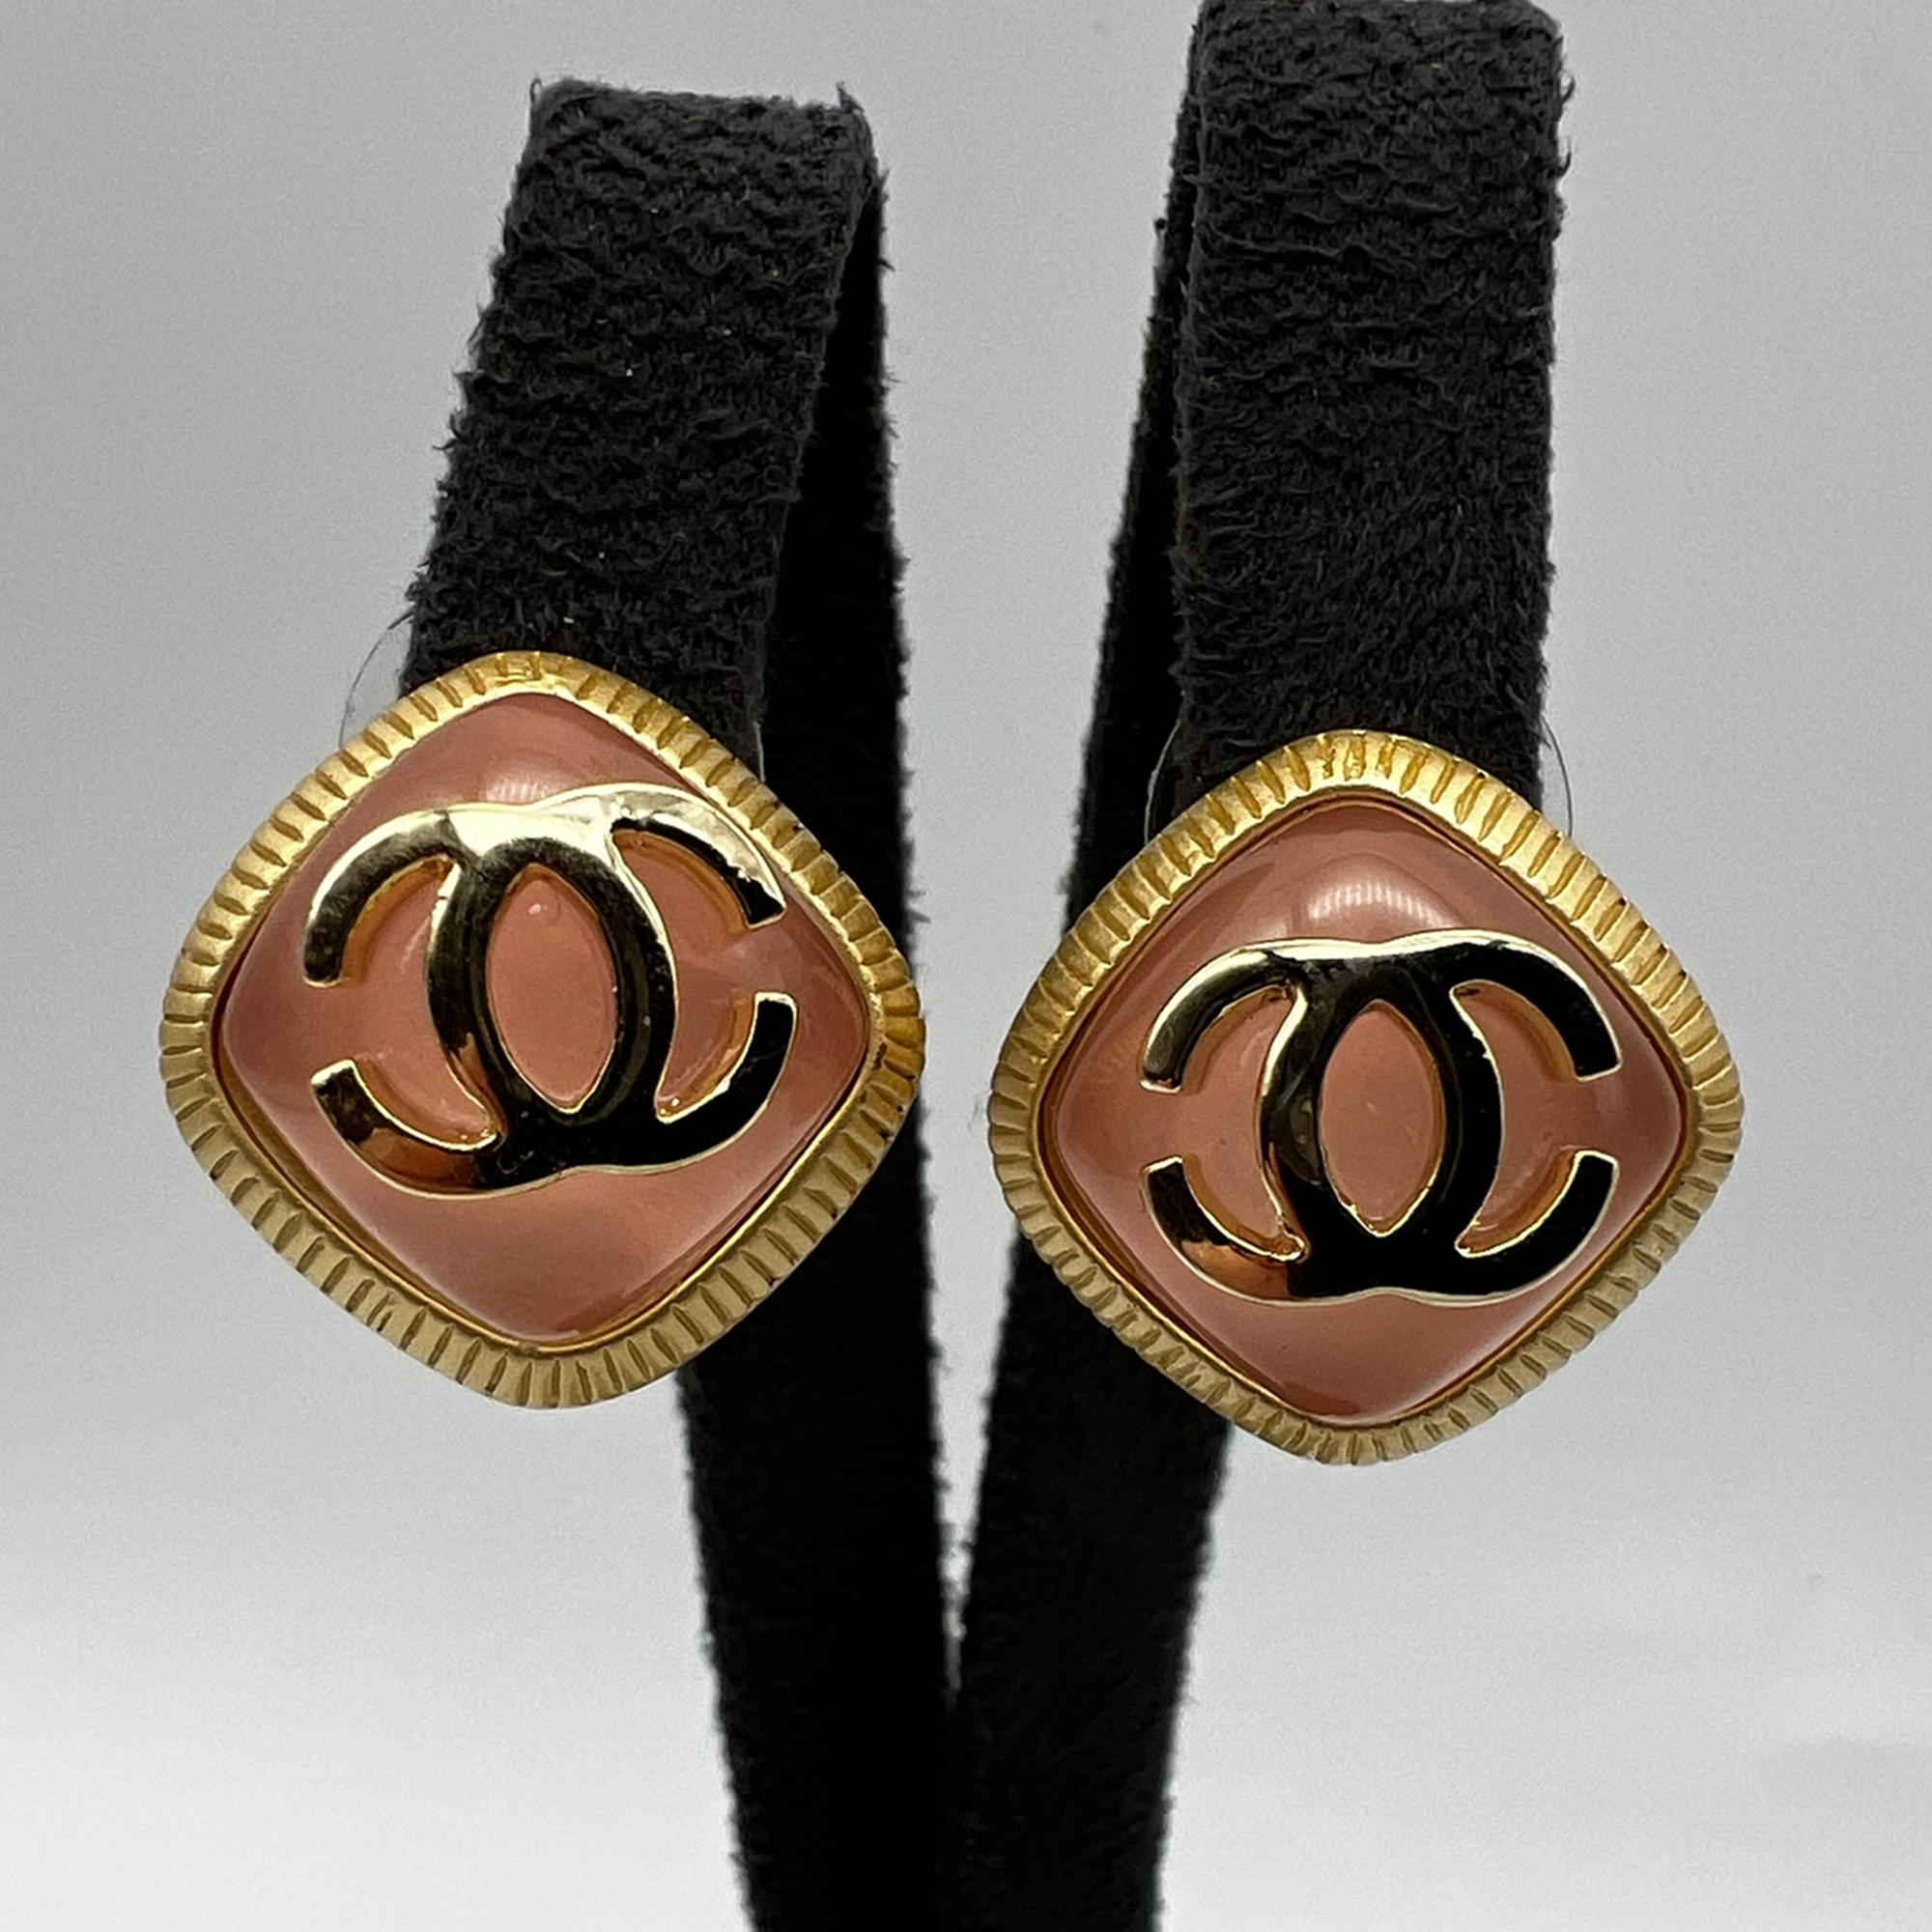 Chanel Button Earrings - Vintage – Elite HNW - High End Watches, Jewellery  & Art Boutique